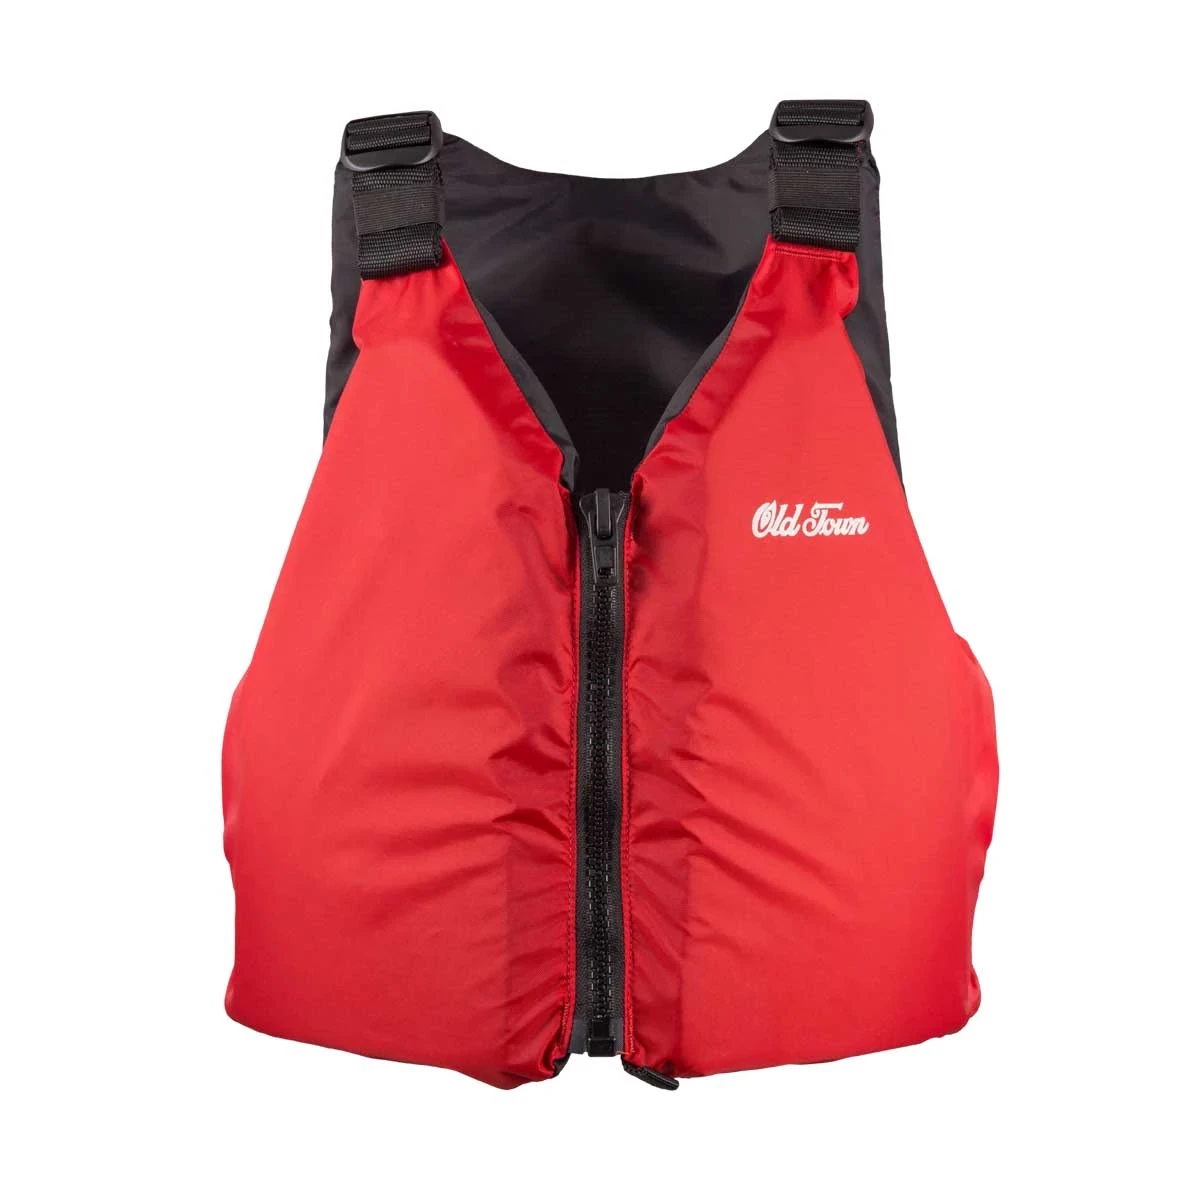 Outfitter Universal PFD - Red